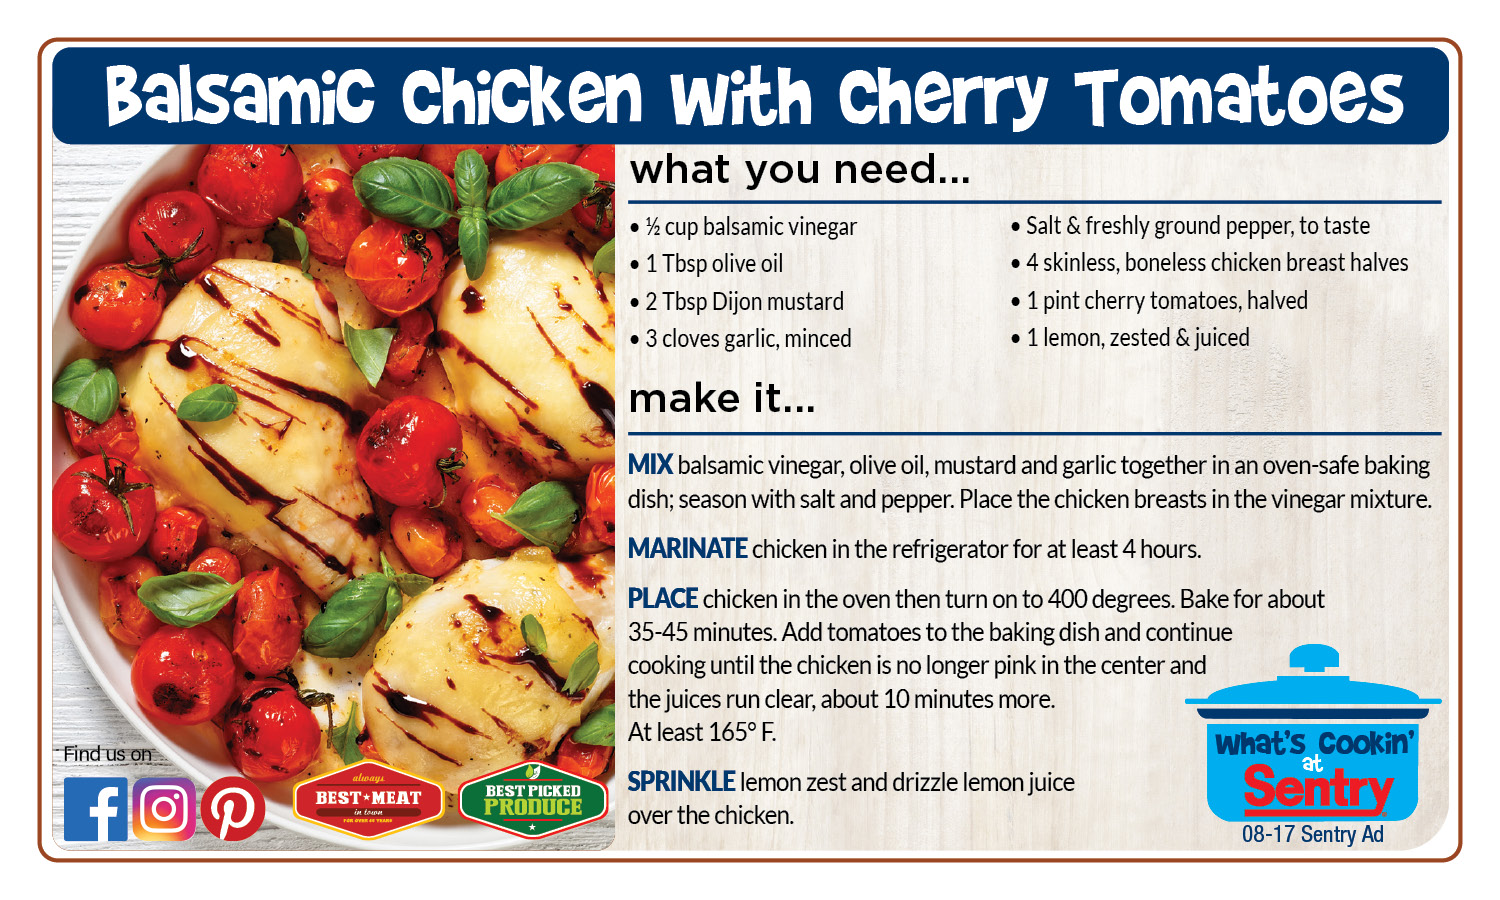 Balsamic Chicken with Cherry Tomatoes